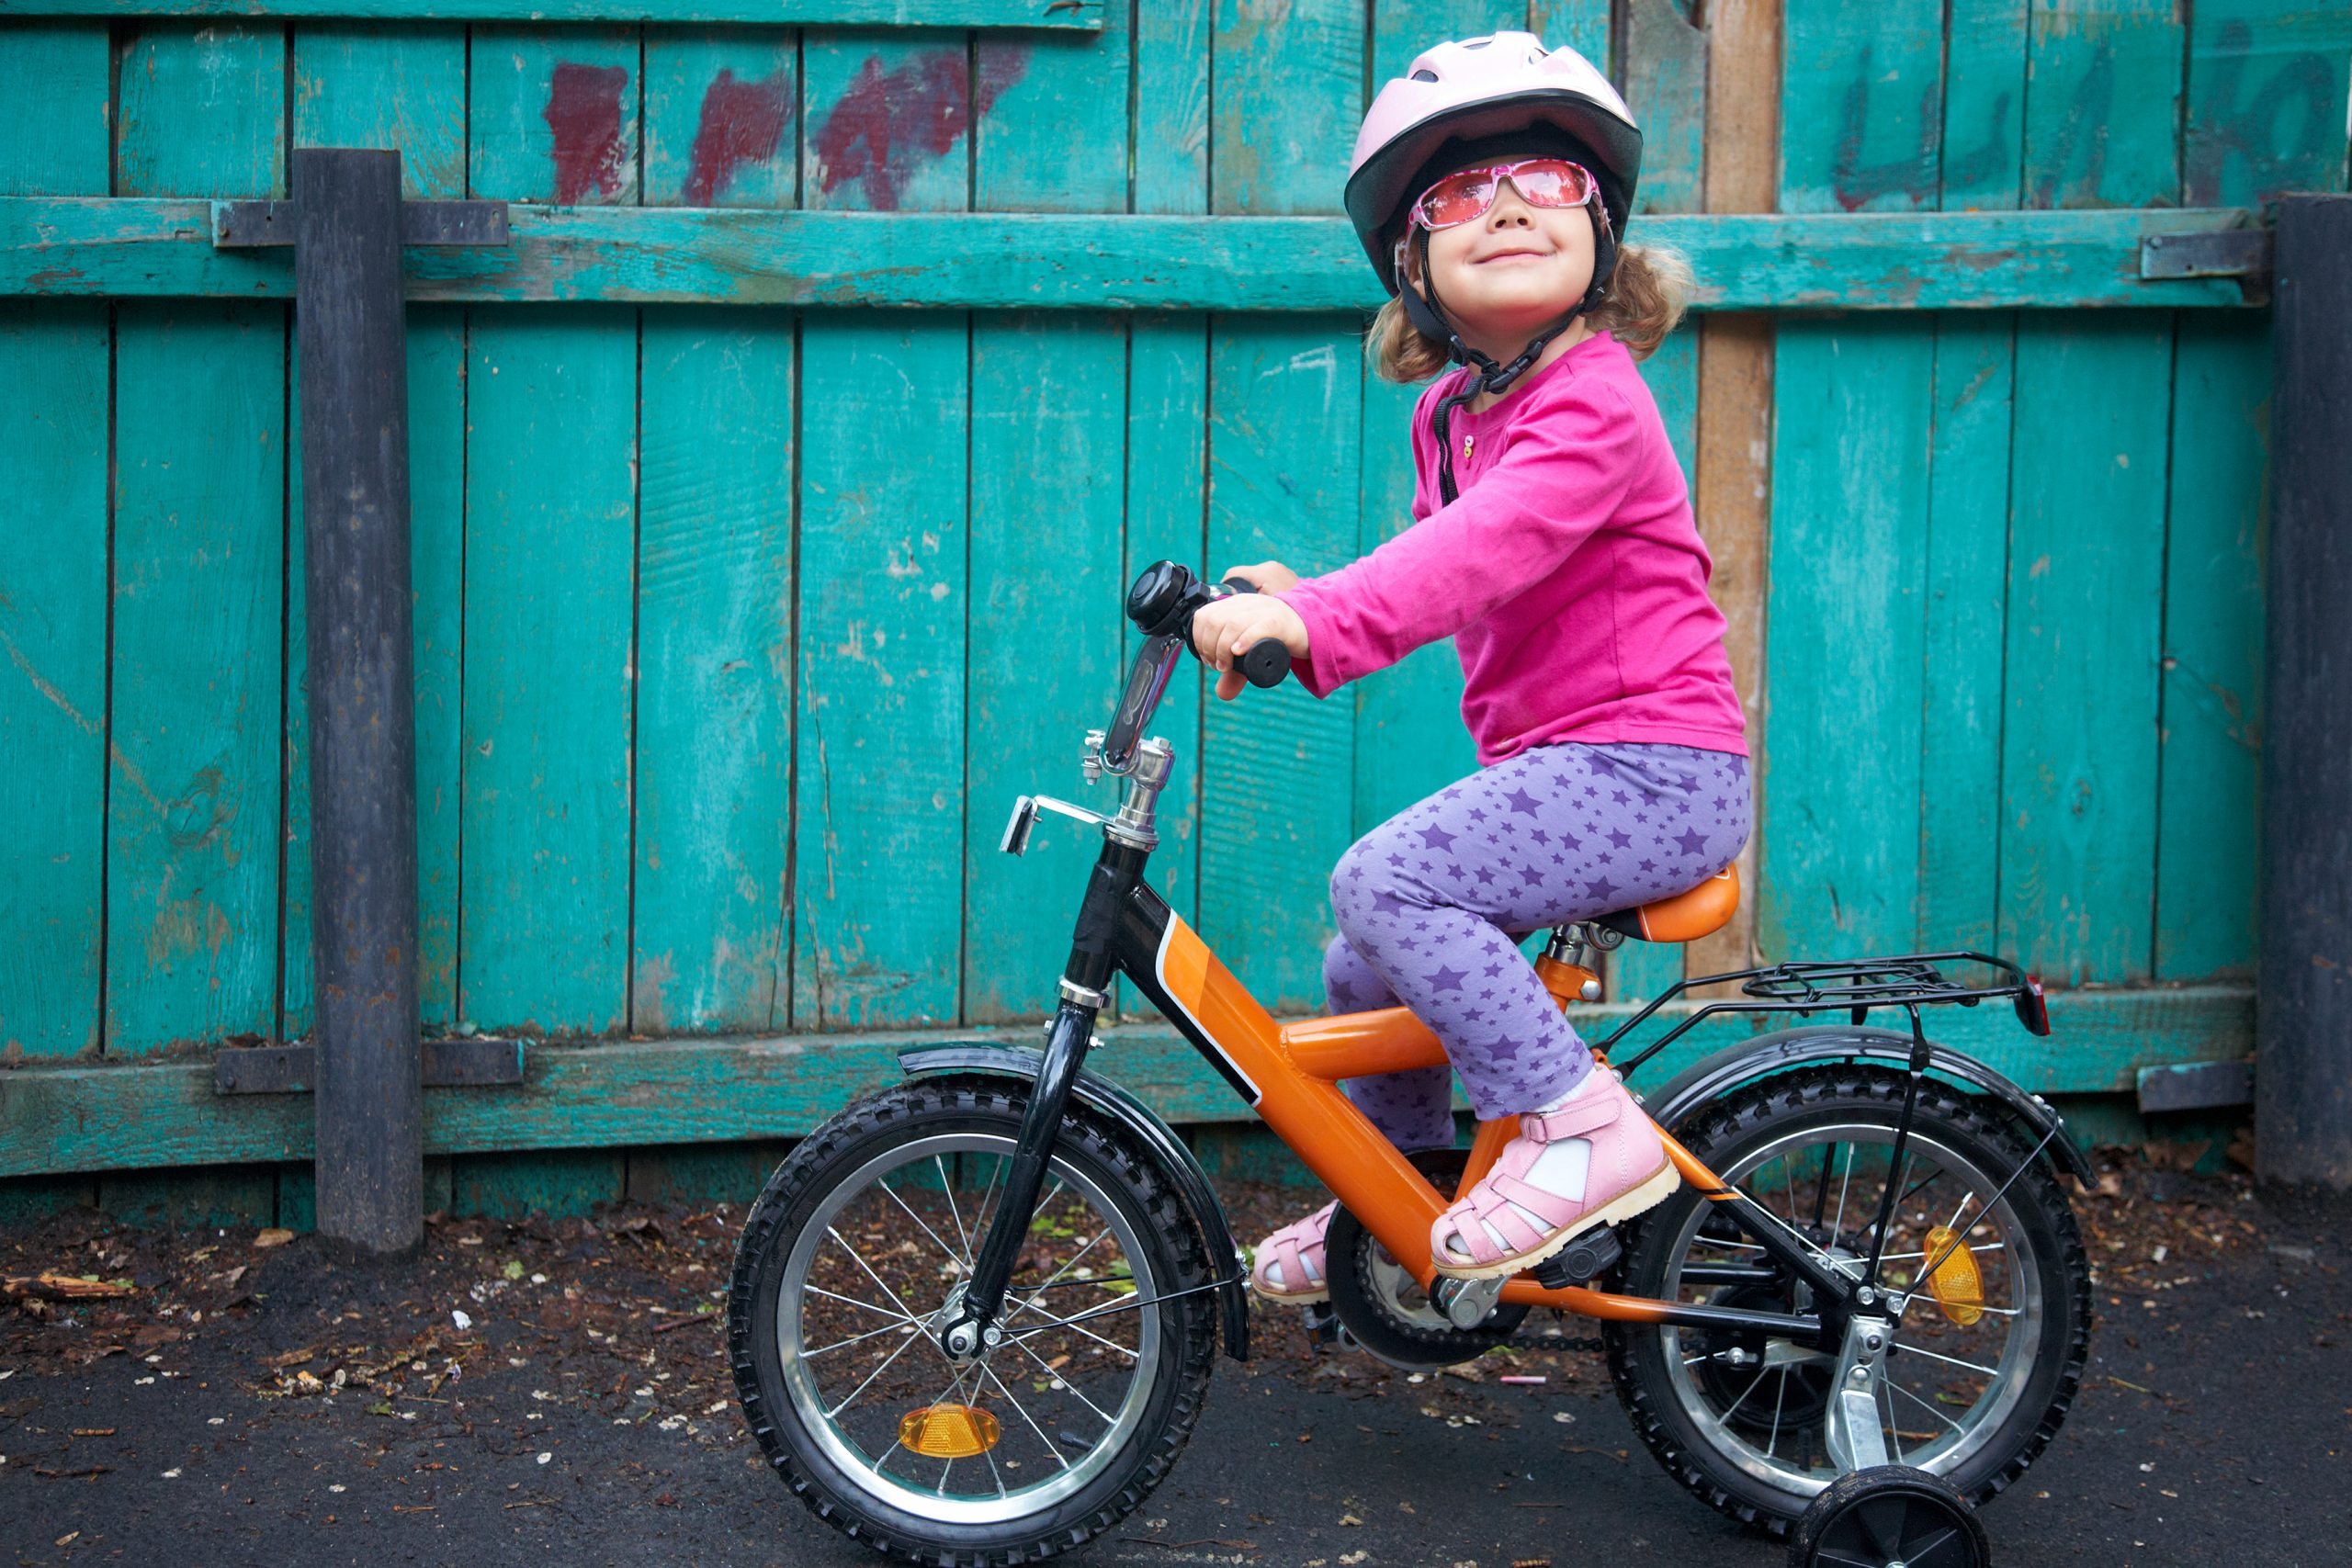 A young girl wearing pink sunglasses and a helmet, riding her bike